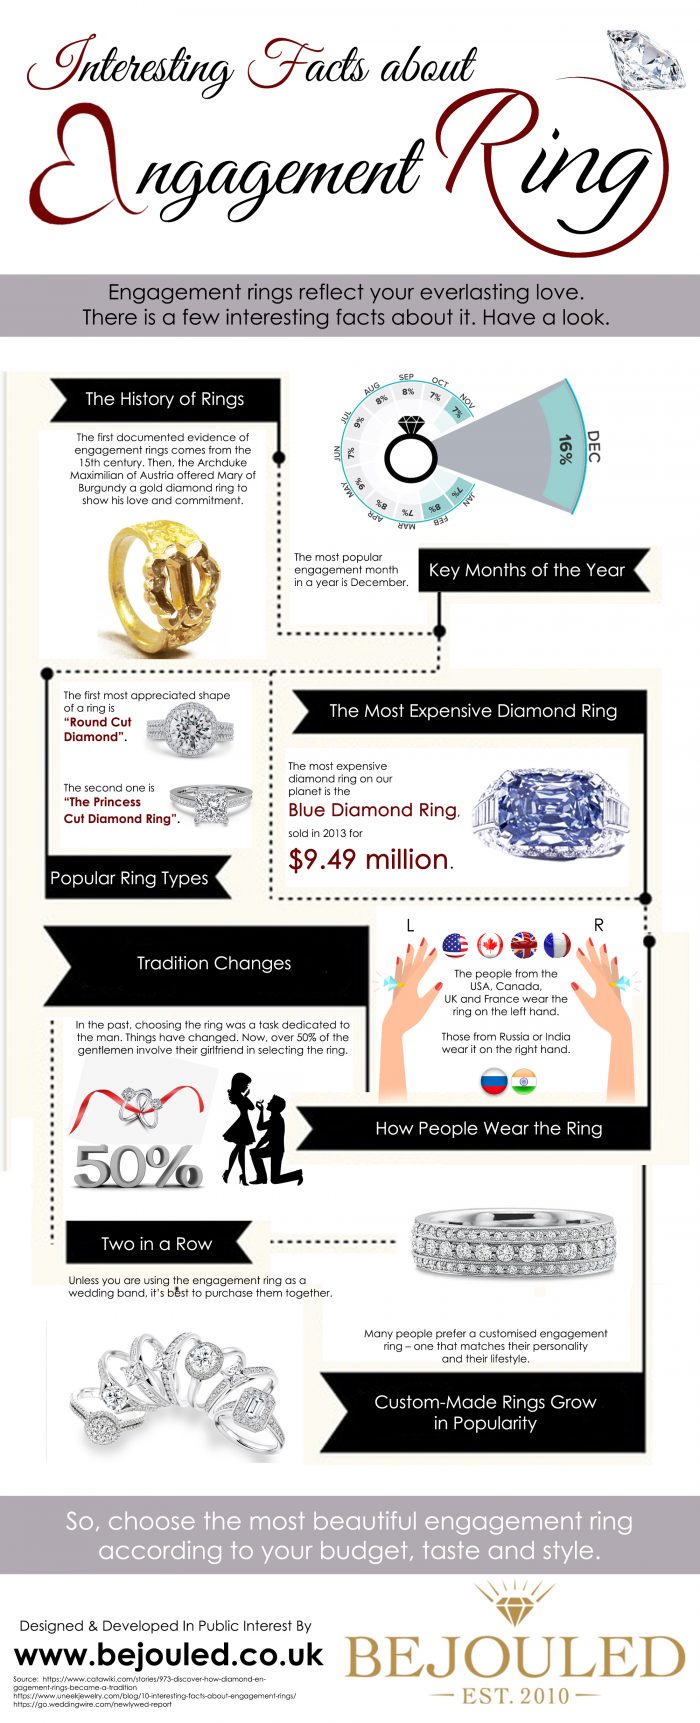 Interesting Facts about Engagement Rings